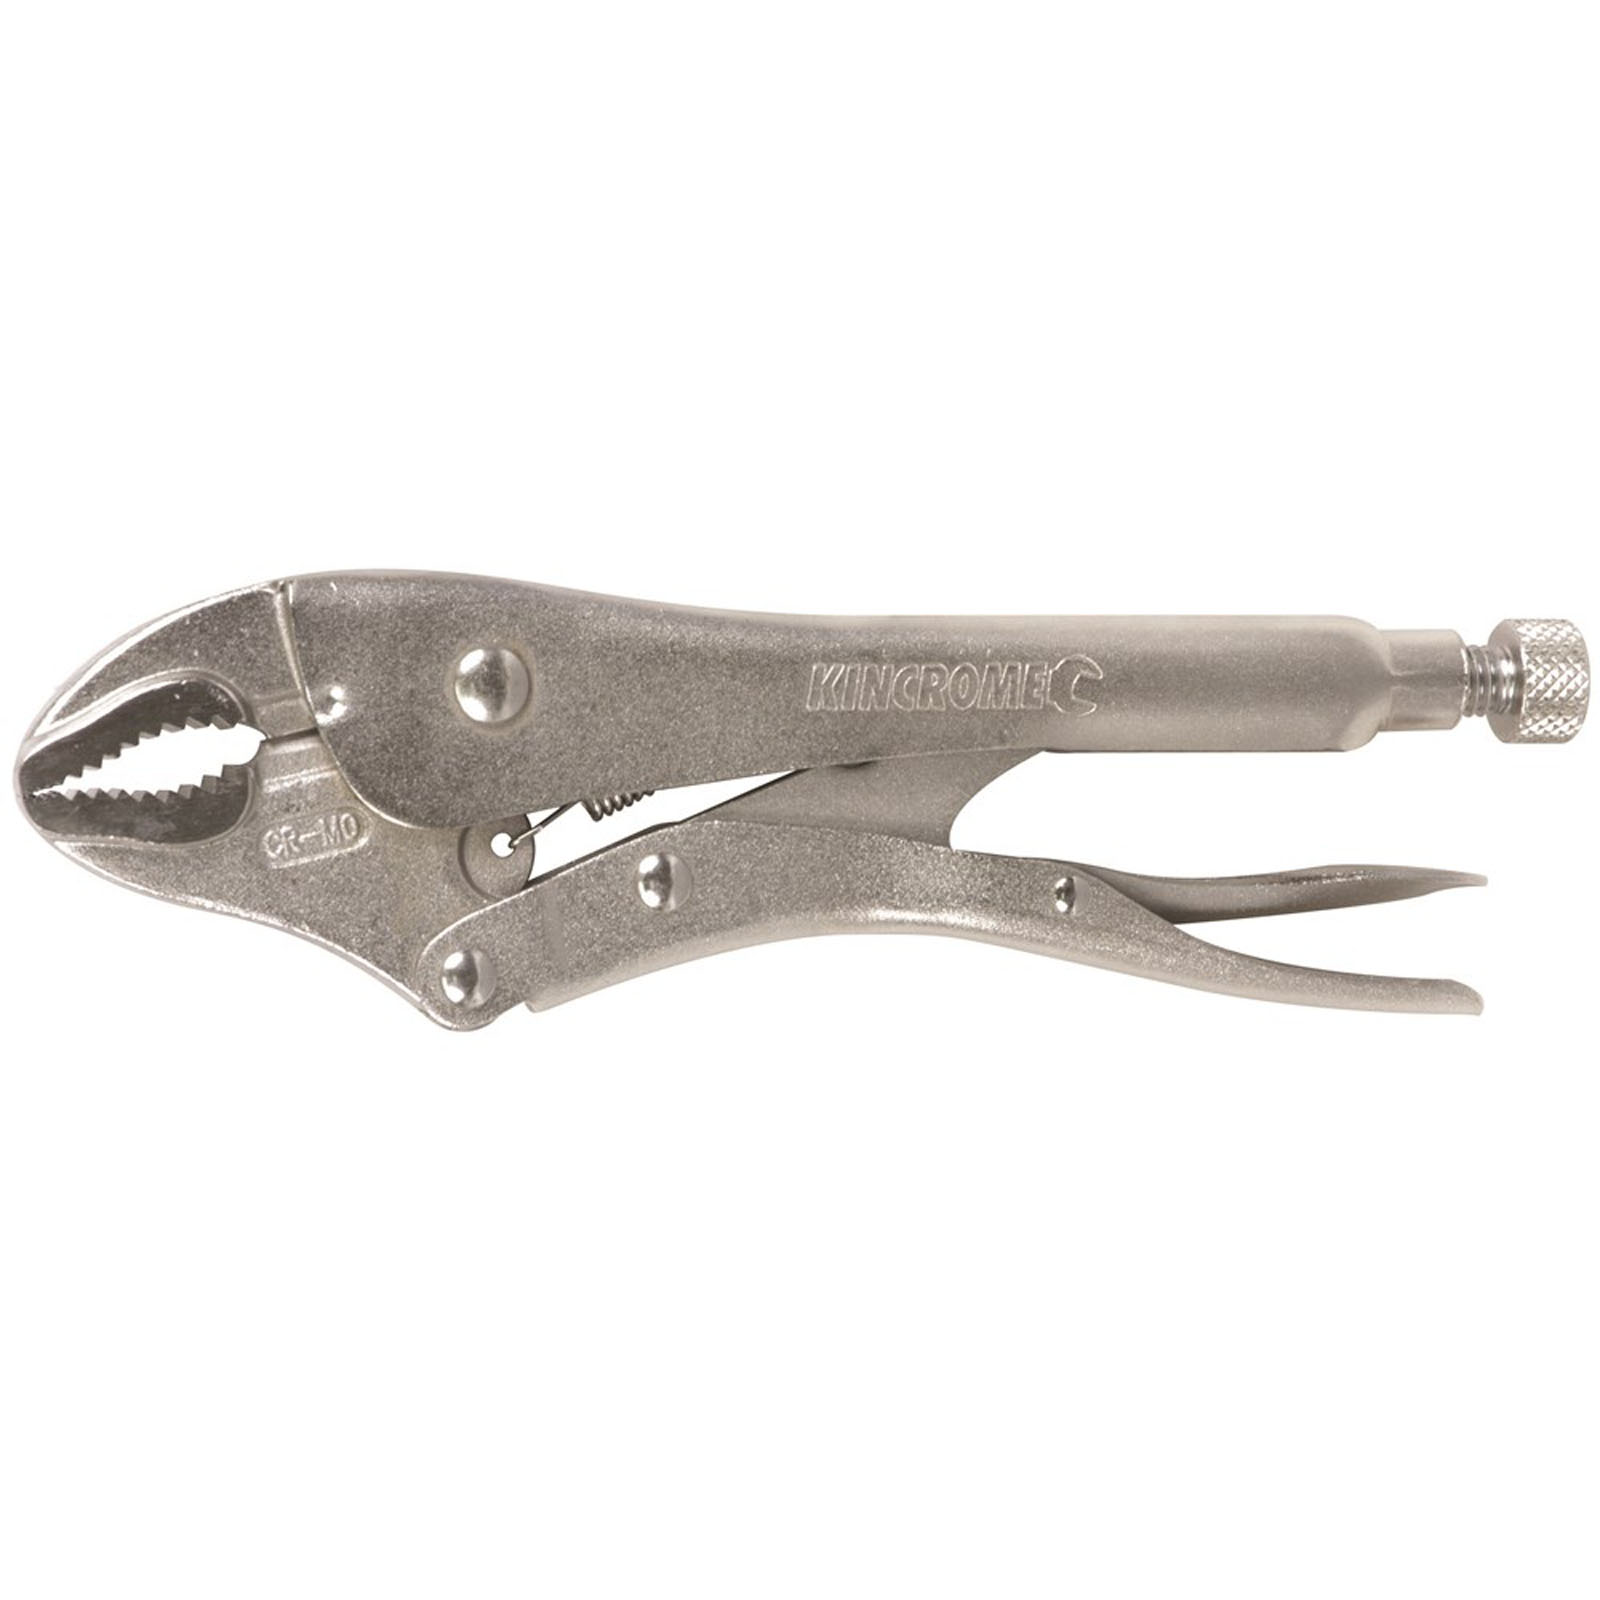 Locking Pliers Curved Jaw 125mm (5